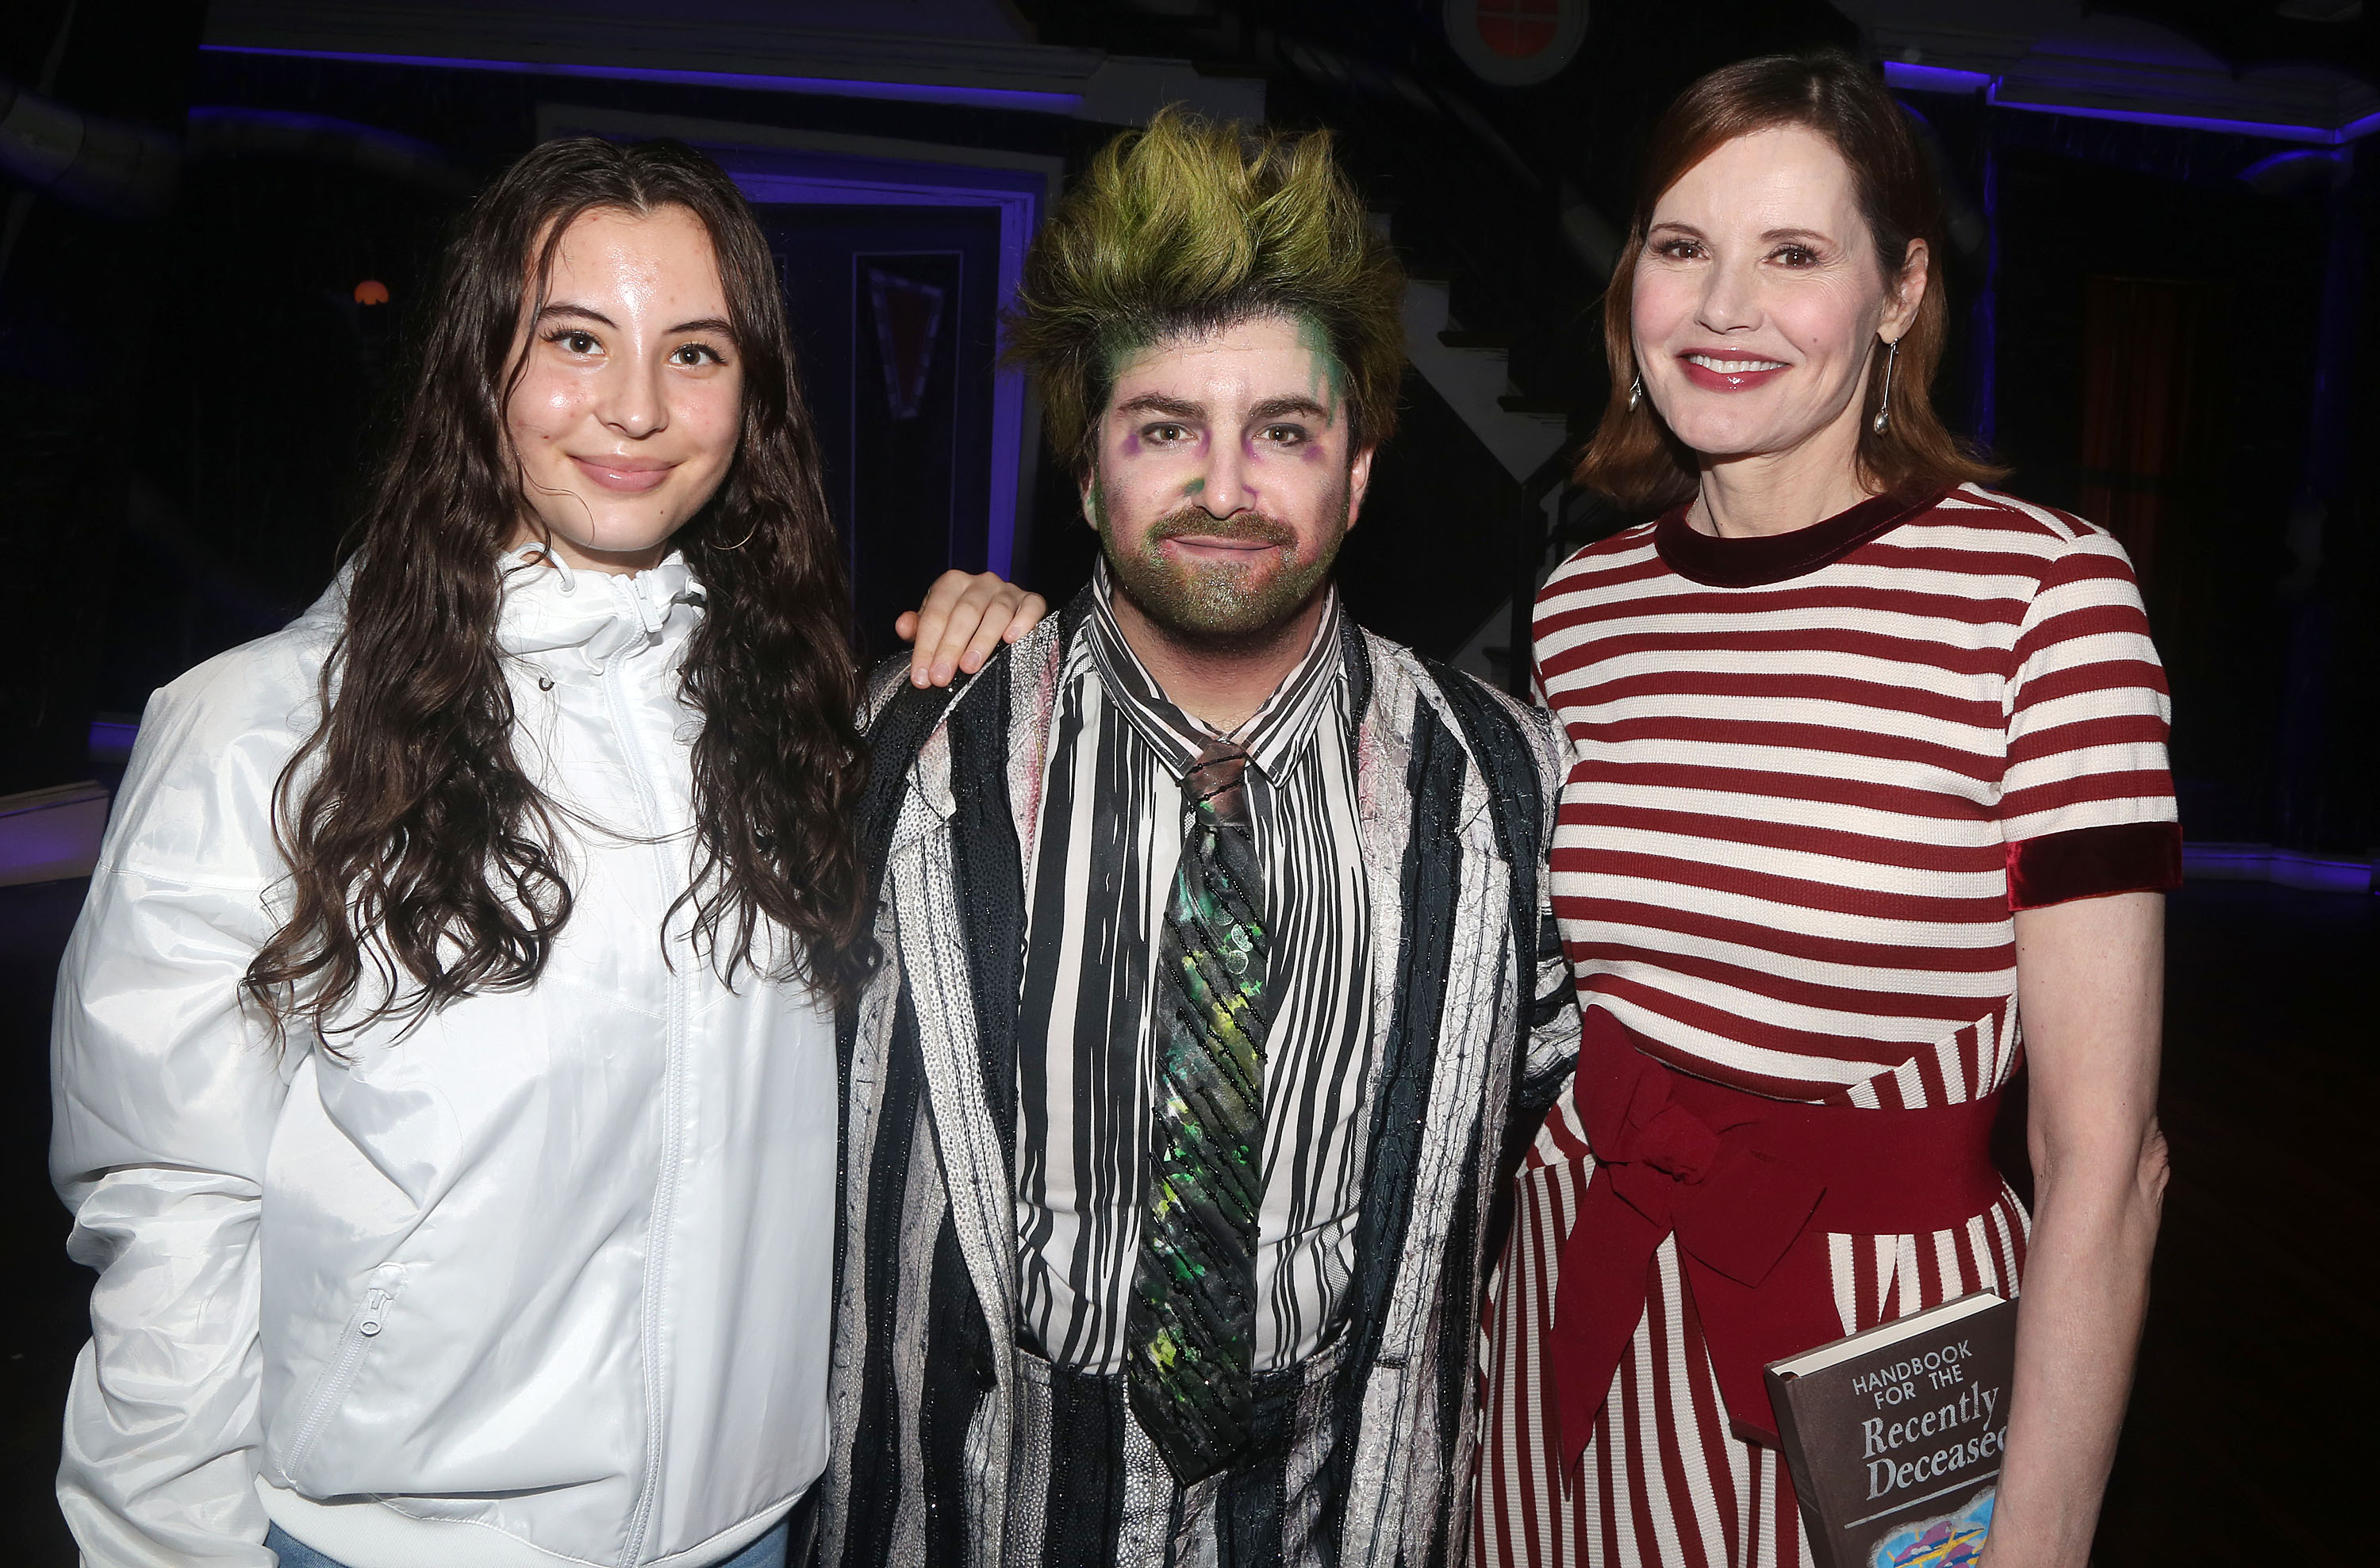 (L-R) Alizeh Keshvar Davis-Jarrahy, Alex Brightman as Beetlejuice, and Geena Davis pose backstage at the Broadway musical based on "Beetlejuice" at The Winter Garden Theatre on September 21, 2019, in New York City. | Source: Getty Images